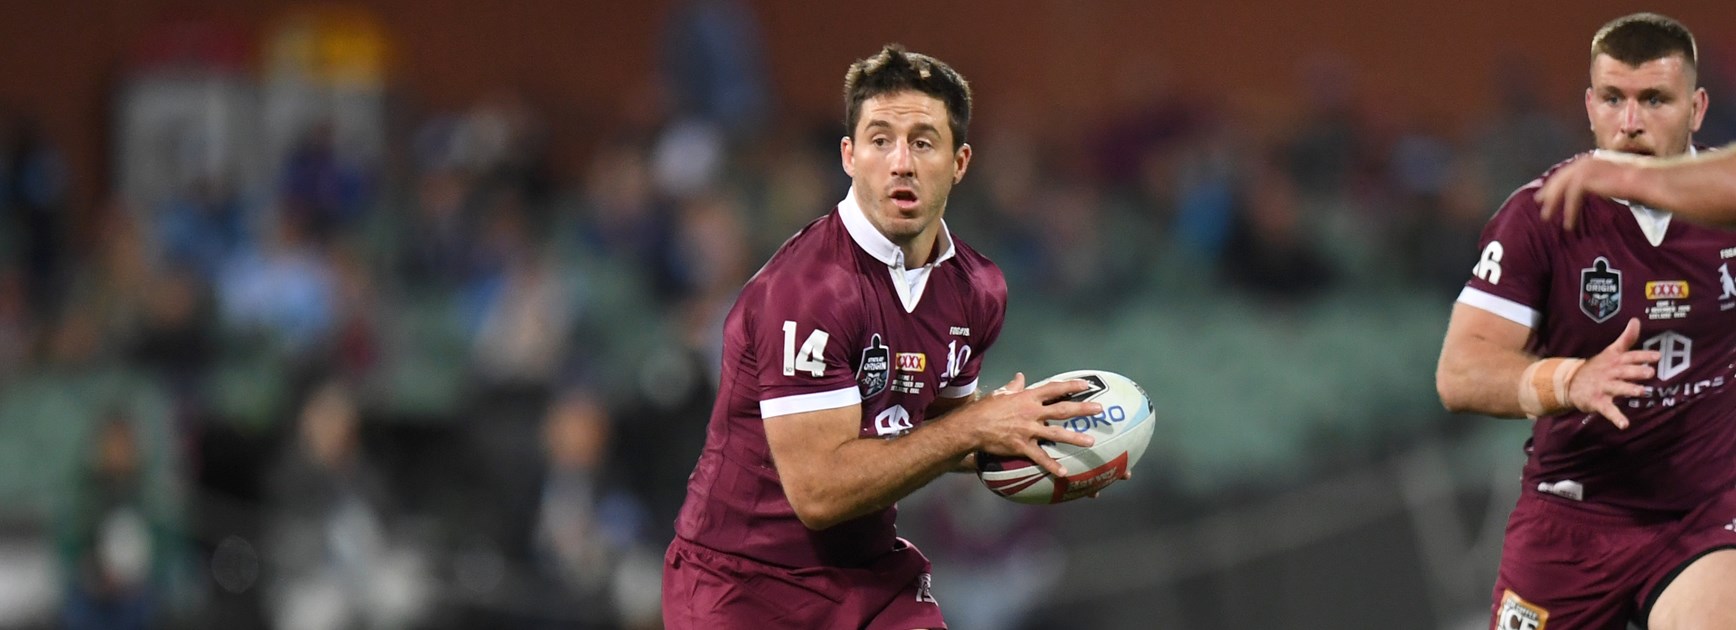 State of Origin I: How they'll line up - Final teams announced